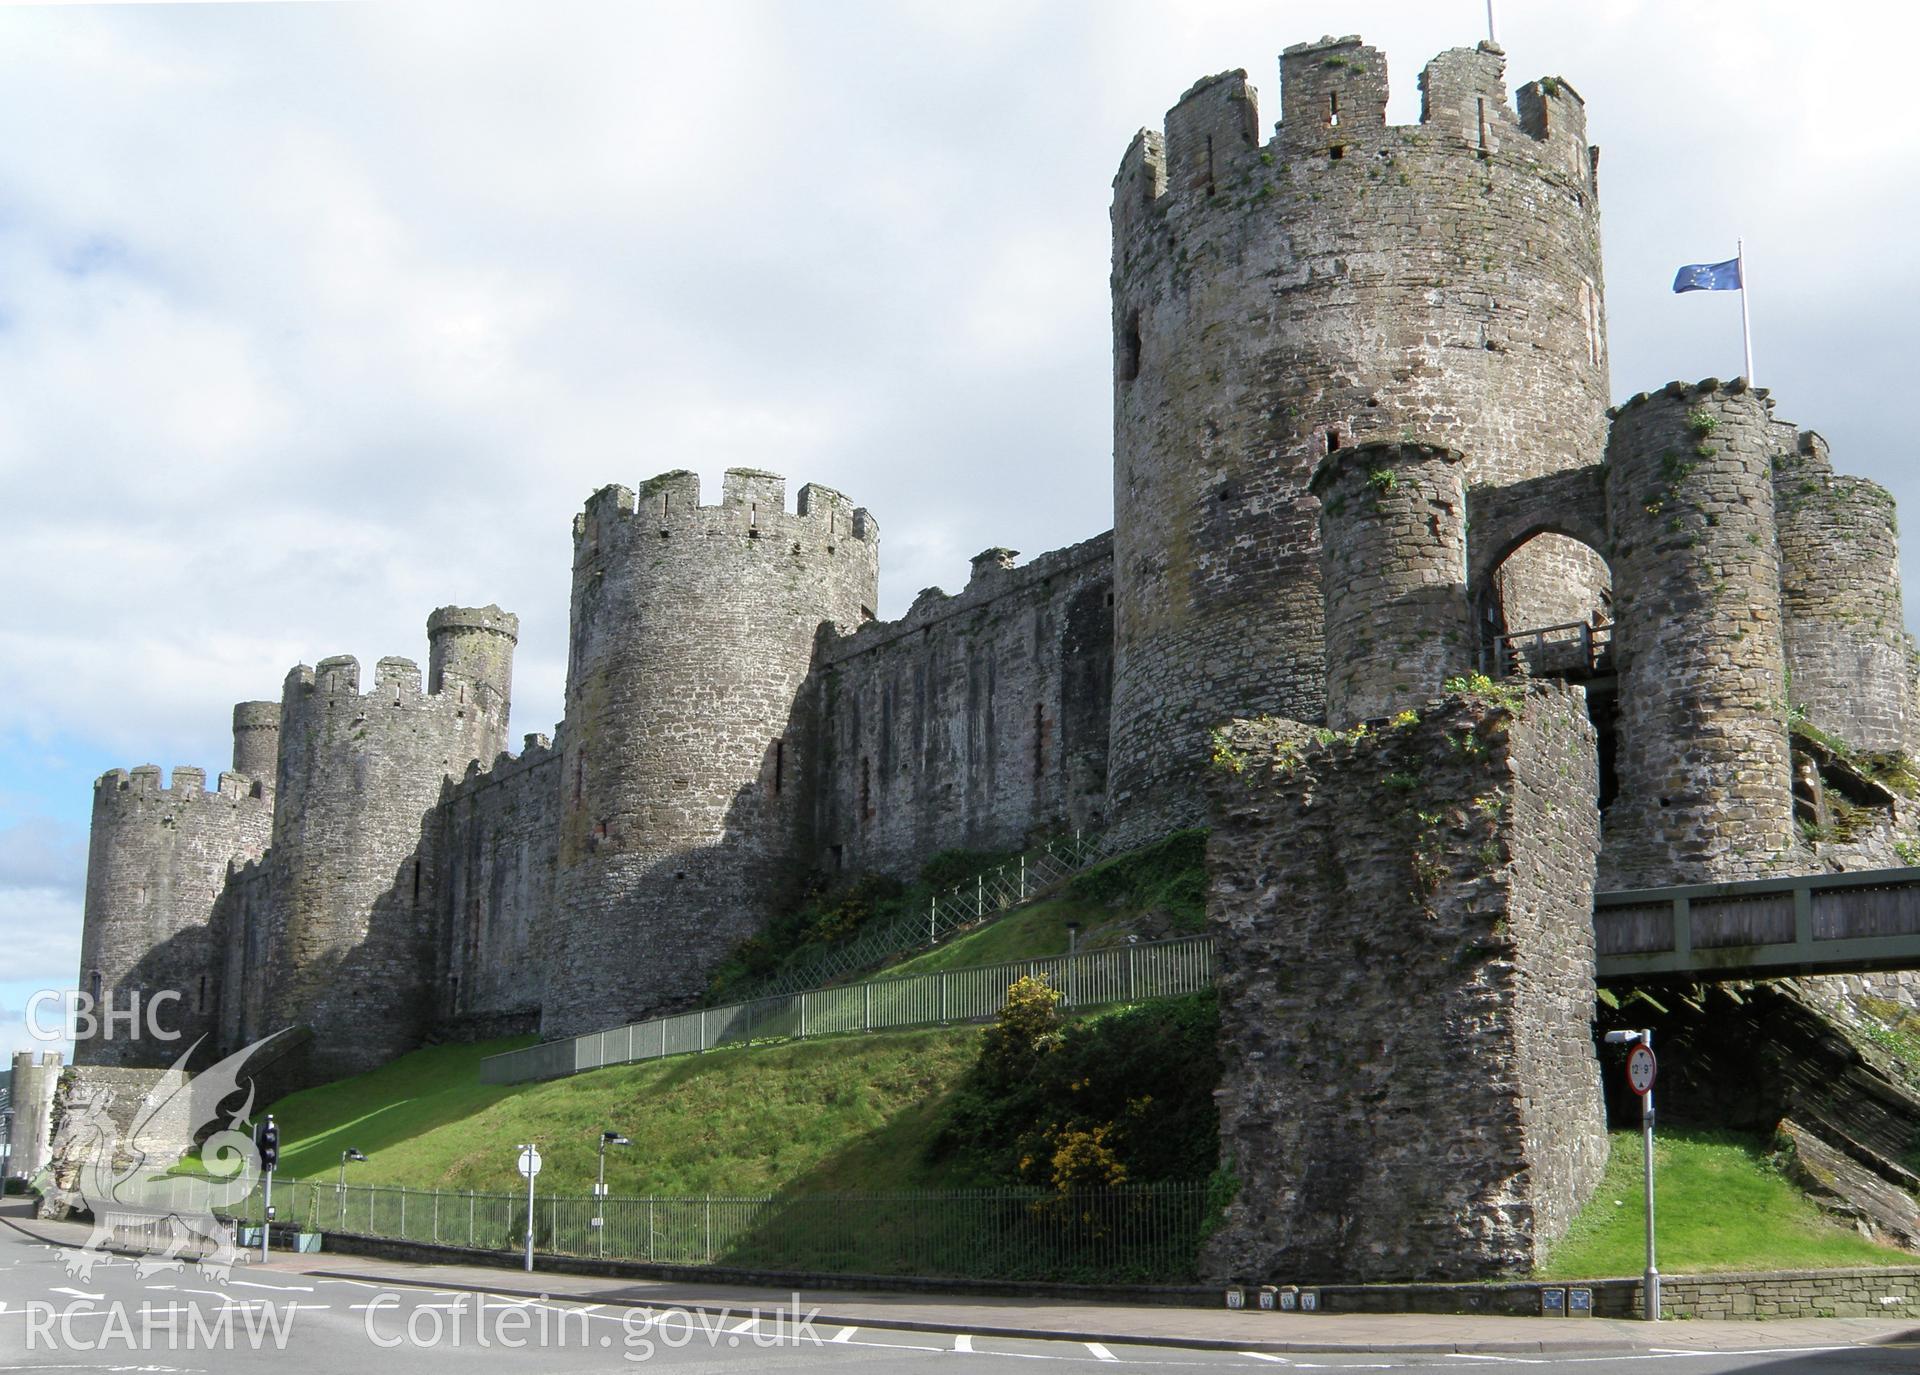 Colour photo of Conwy Castle, taken by Paul R. Davis, 9th May 2014.